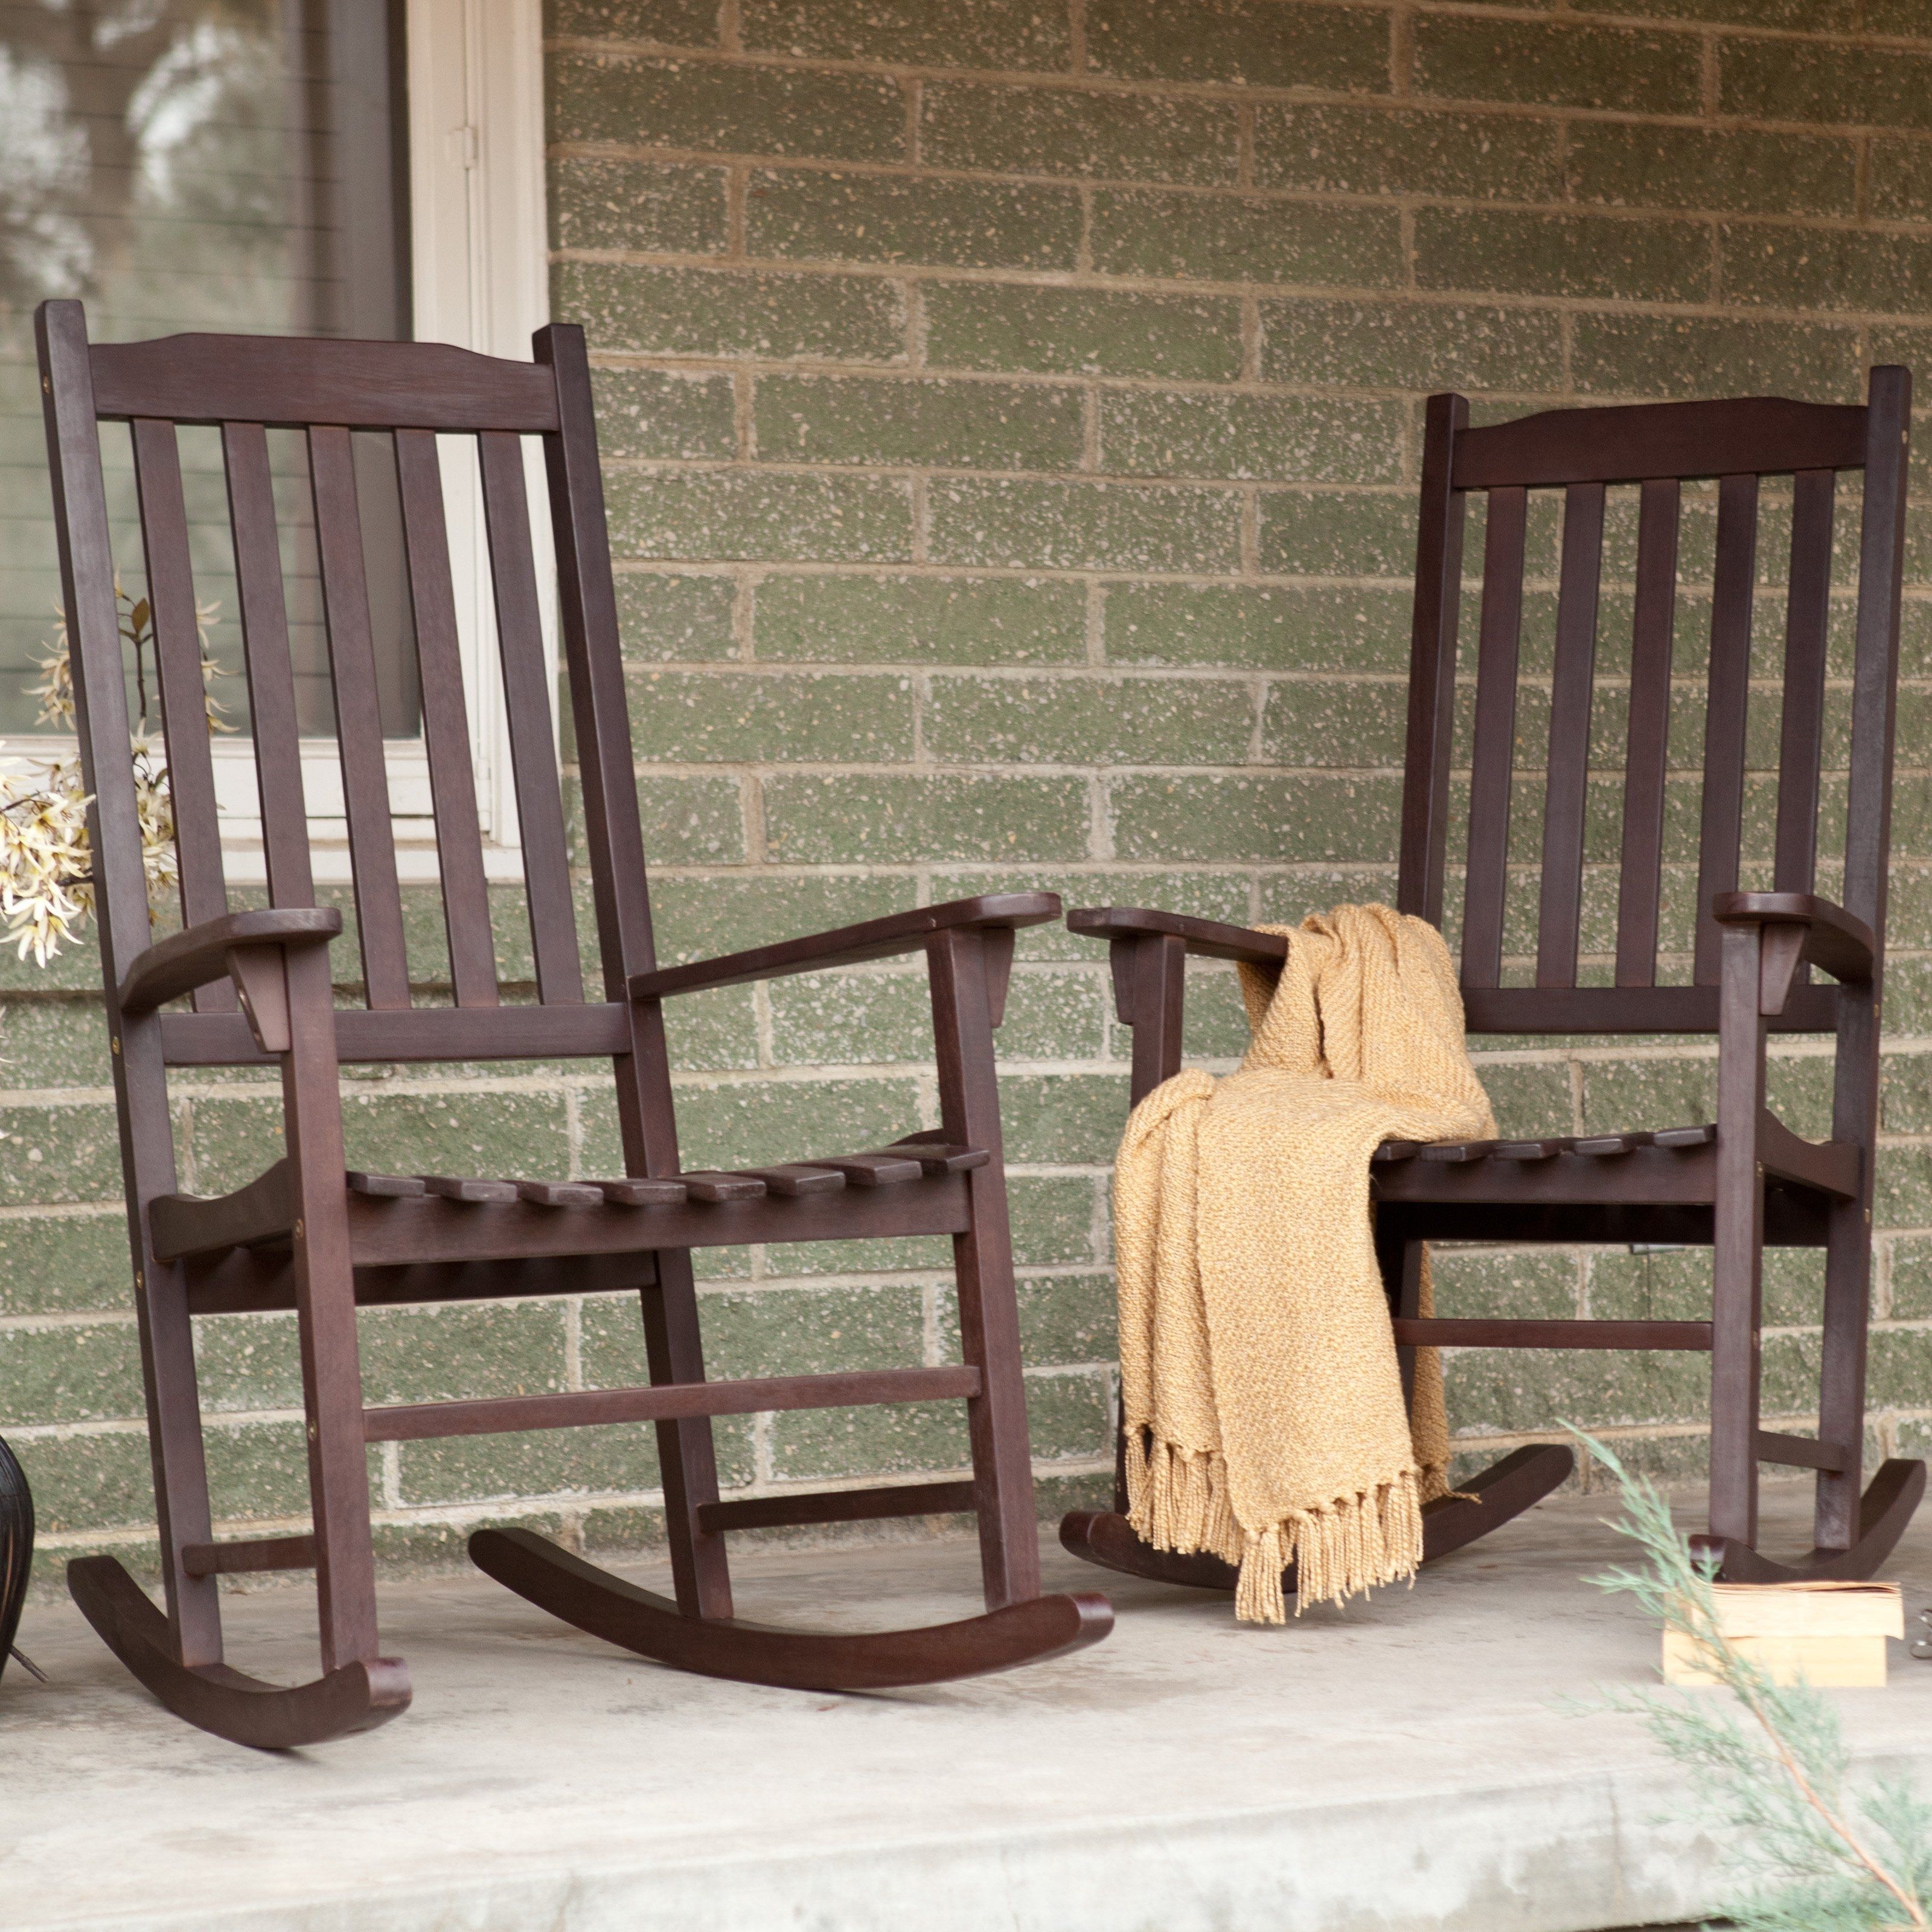 Well Known Chair Black Indoor Rocking Chair Black Patio Rocking Chairs Black Within Black Patio Rocking Chairs (View 10 of 15)